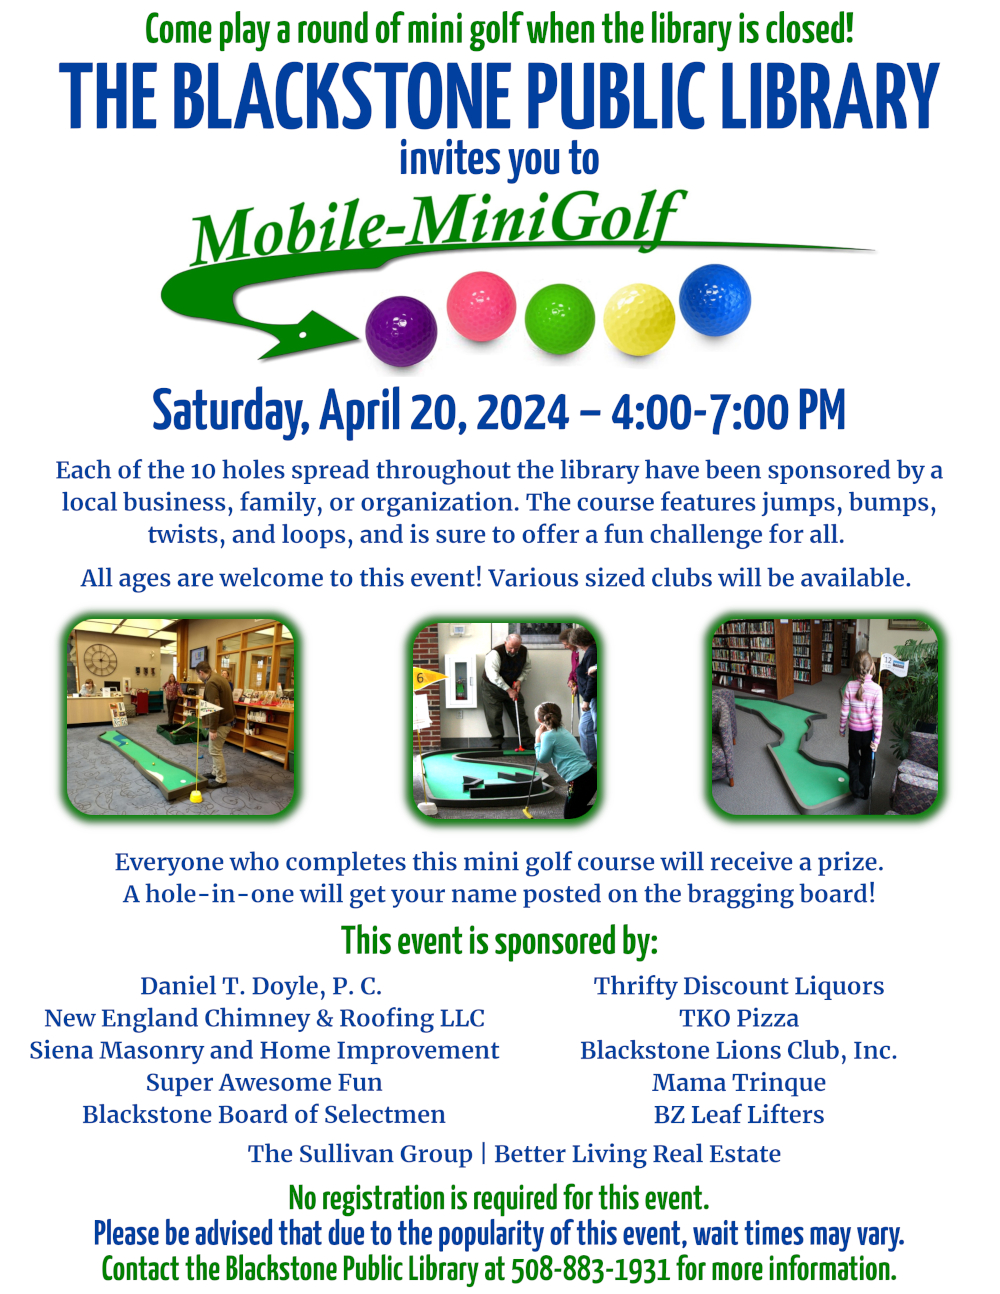 Come play a round of mini golf when the library is closed!  The Blackstone Public Library invites you to Mobile Mini Golf! Saturday, April 20, 2024 from 4:00 – 7:00 PM.  Each of the 10 holes spread throughout the library have been sponsored by a local business, family, or organization. The course features jumps, bumps, twists, and loops, and is sure to offer a fun challenge for all.  All ages are welcome to this event. Various sized clubs will be available.  Everyone who completes the course will receive a prize. A hole-in-one will get your name posted on the bragging board!  No registration is required for this event. Please be advised that due to the popularity of this event, wait times may vary. Contact the Blackstone Public Library at 508-883-1931 for more information.  This event is sponsored by: Daniel T. Doyle, P. C.; New England Chimney & Roofing LLC; Siena Masonry and Home Improvement; Super Awesome Fun; Blackstone Board of Selectmen; Mama Trinque; Thrifty Discount Liquors; TKO Pizza; Blackstone Lions Club, Inc.; The Sullivan Group | Better Living Real Estate; BZ Leaf Lifters  Image description: The flyer features the Mini Golf company’s logo at the top of the page, “Mobile-MiniGolf” with a green arrow underlining it, pointing to four golf balls colored purple, pink, green, yellow, and blue. The flyer also features five photographs of previous minigolf events held by the company.